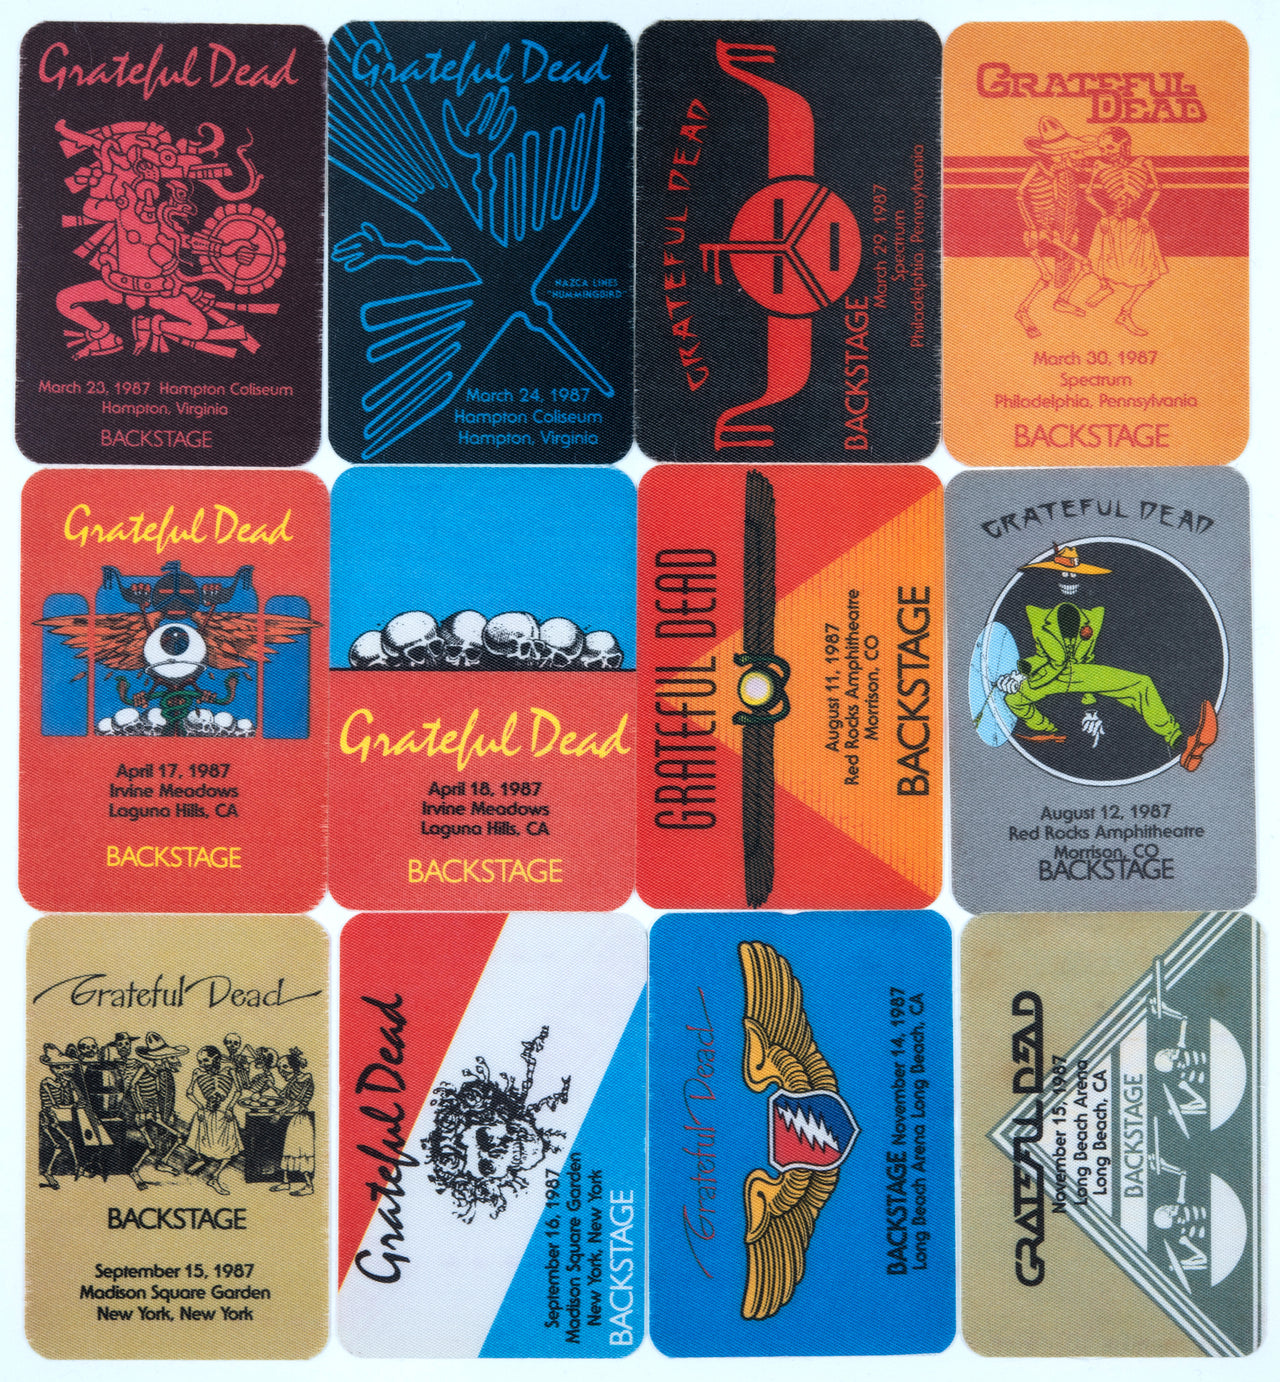 Grateful Dead Backstage Passes (3/23/1987 - 11/15/1987) from Dan Healy